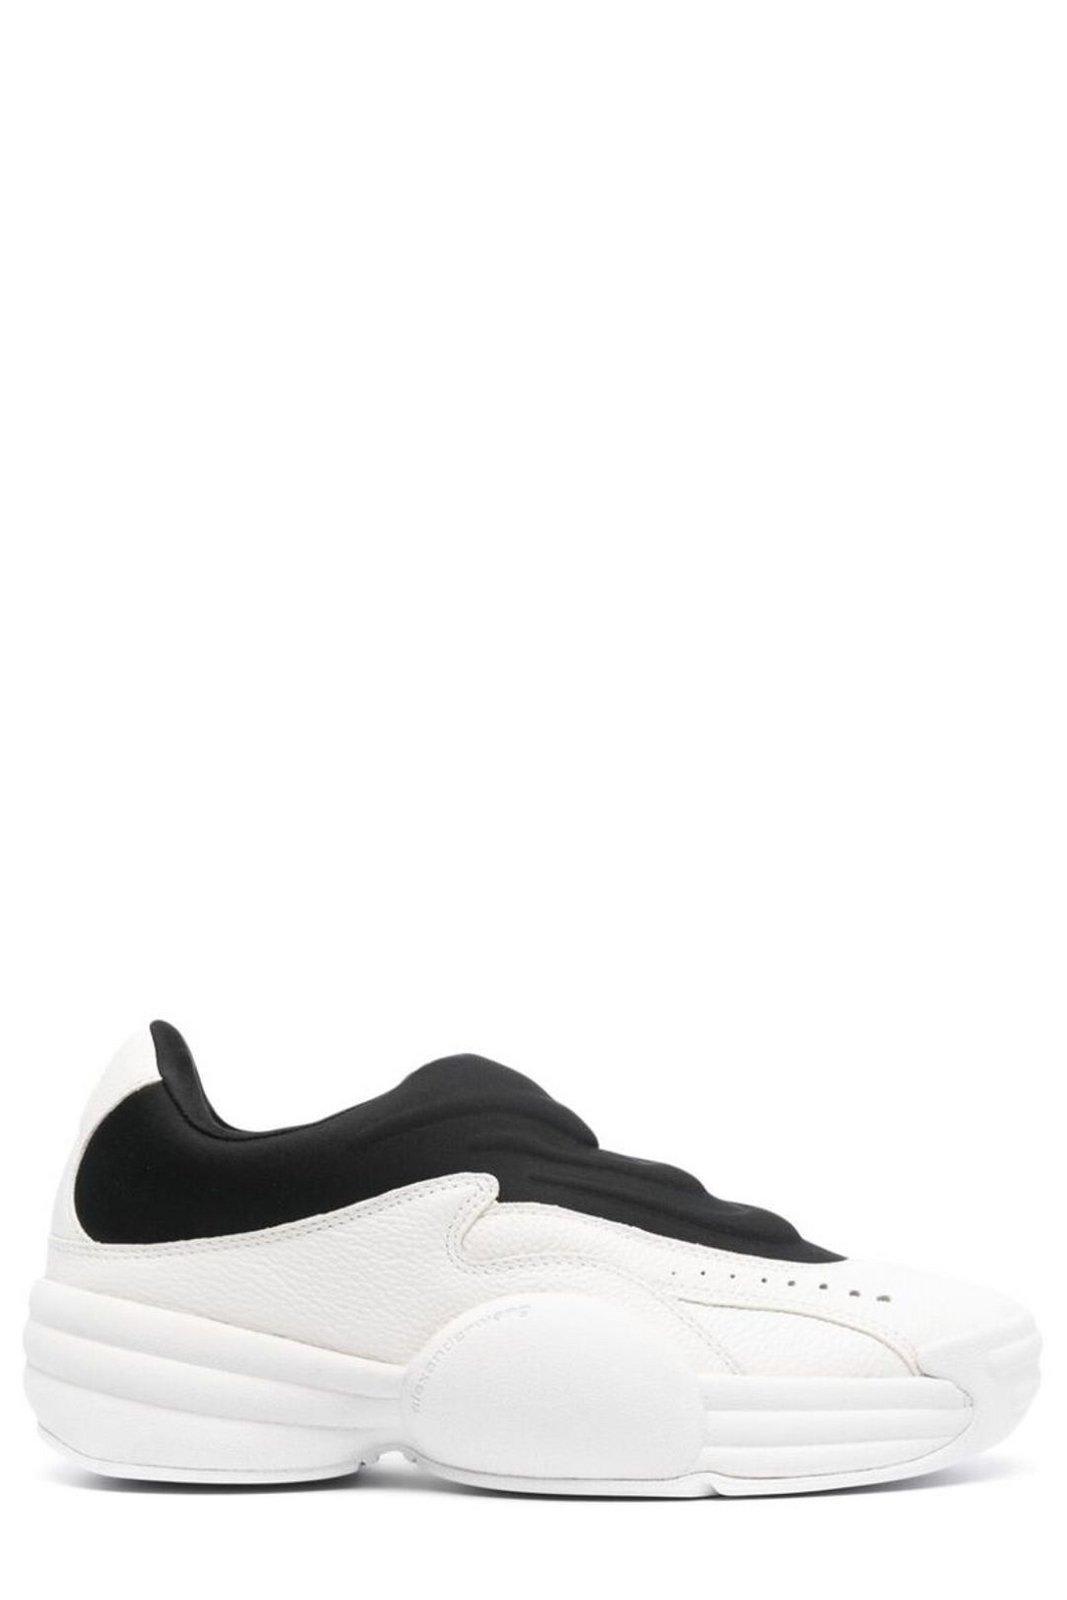 Alexander Wang Lace-up Sneakers in Black | Lyst